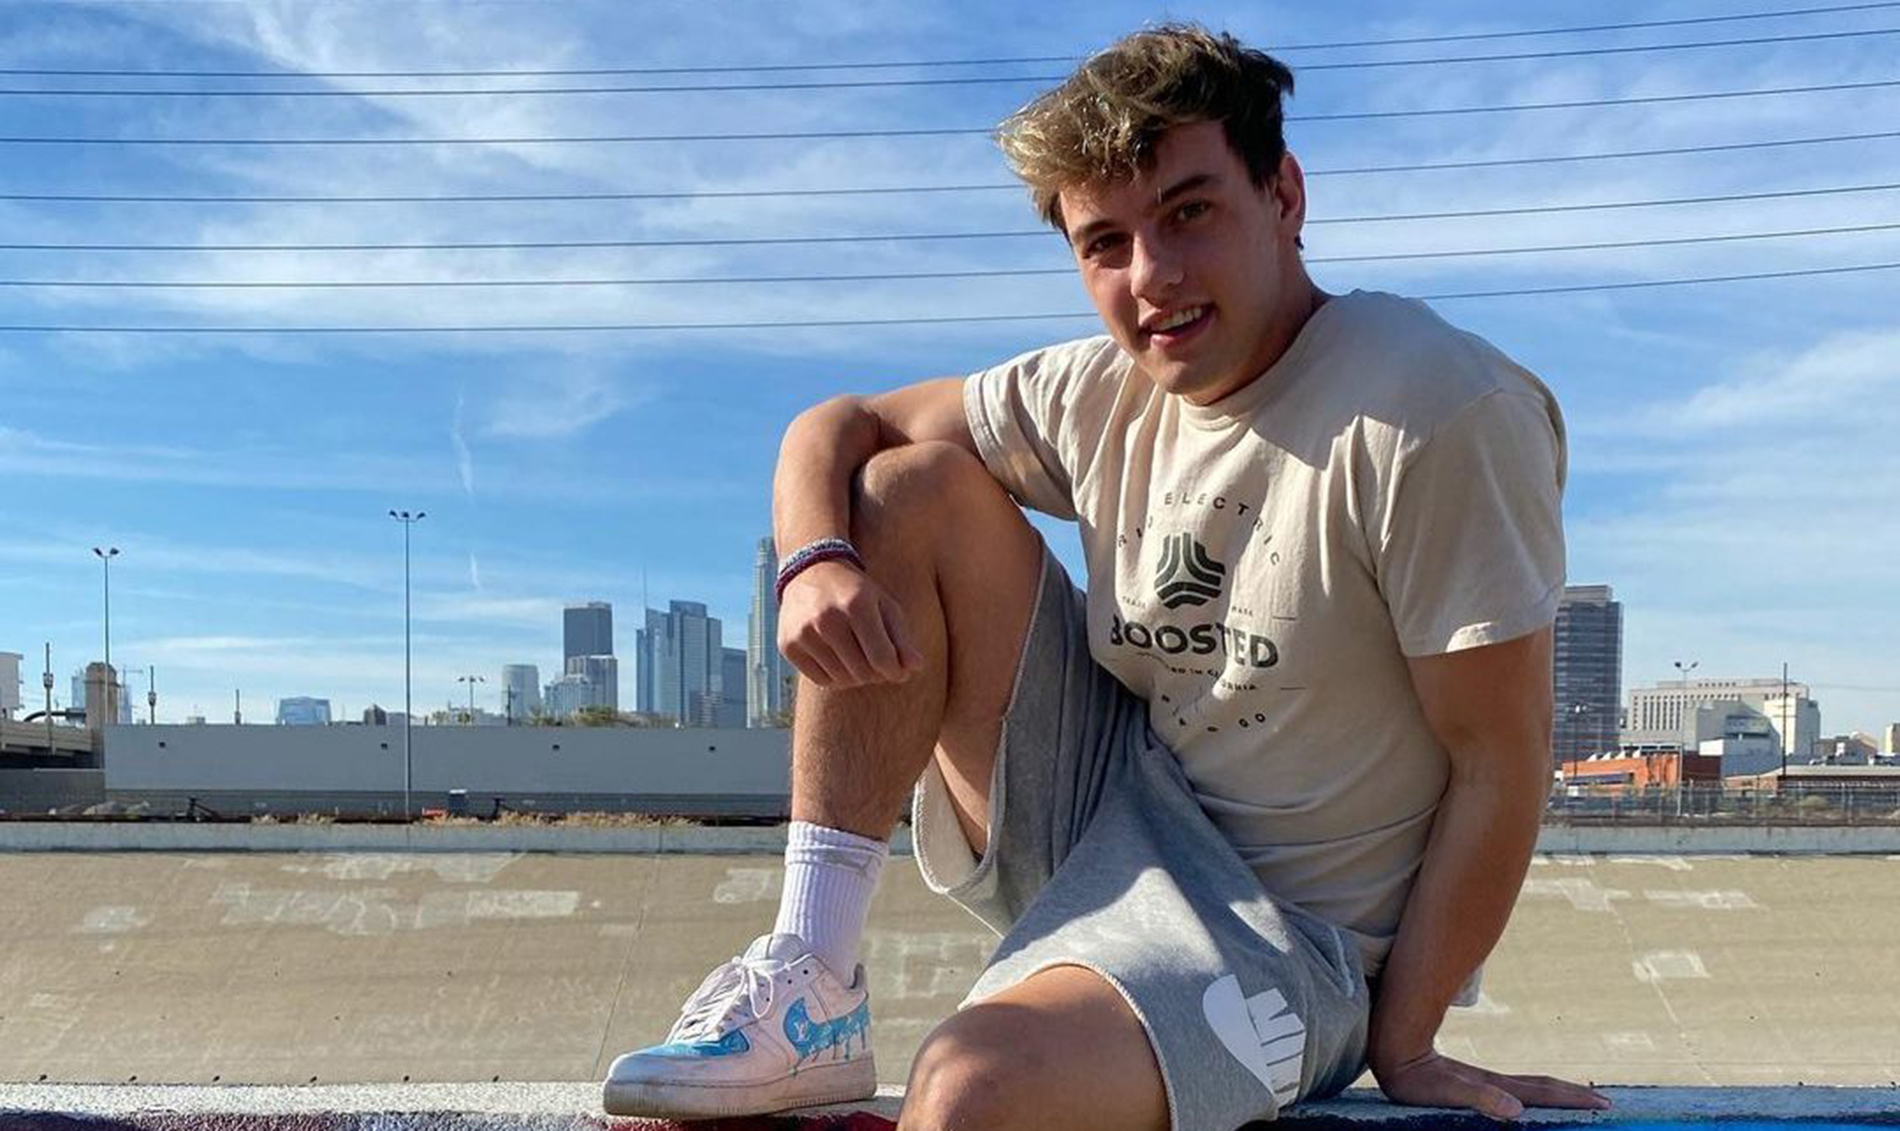 Creators On The Rise: Cam Casey Spent The Past Year Conquering TikTok And Snapchat. Now He's Making His Move On YouTube Shorts. - Tubefilter